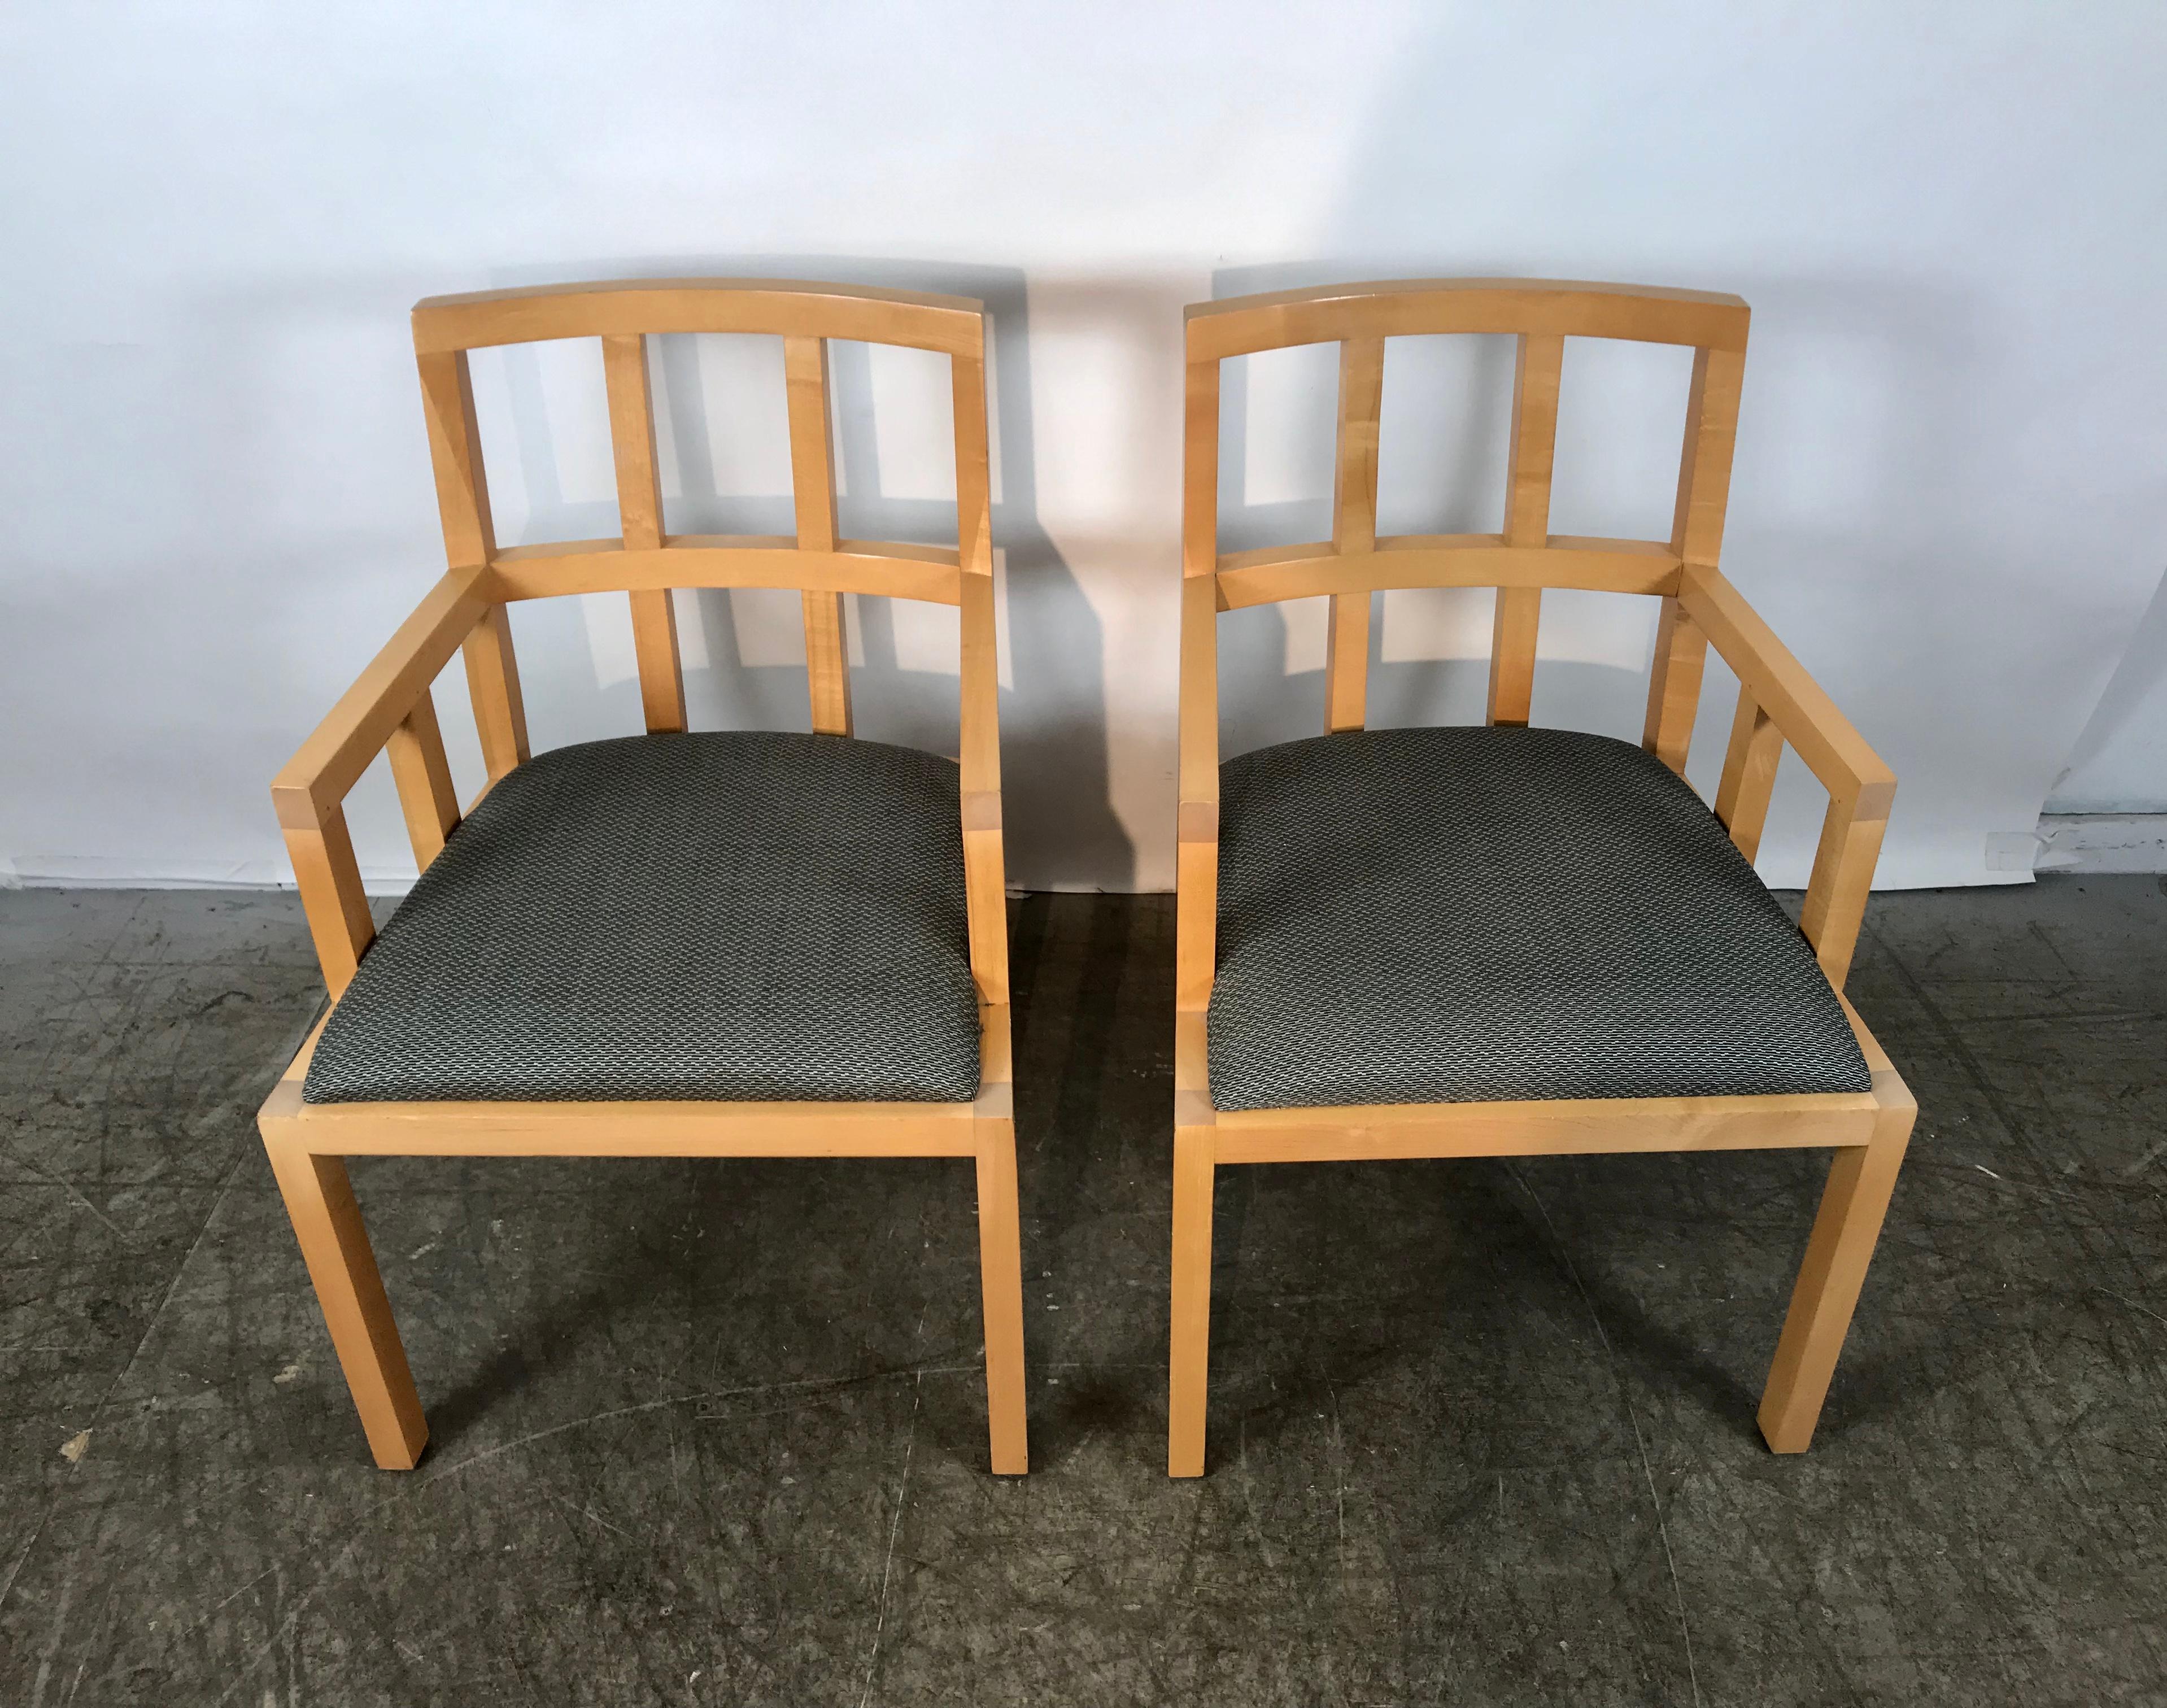 Stunning pair of contemporary modern birch armchairs, Bernhardt Furniture Co., Classic style and design, Superior quality and construction, super sturdy. Extremely comfortable, perfect captains chairs for dining room.